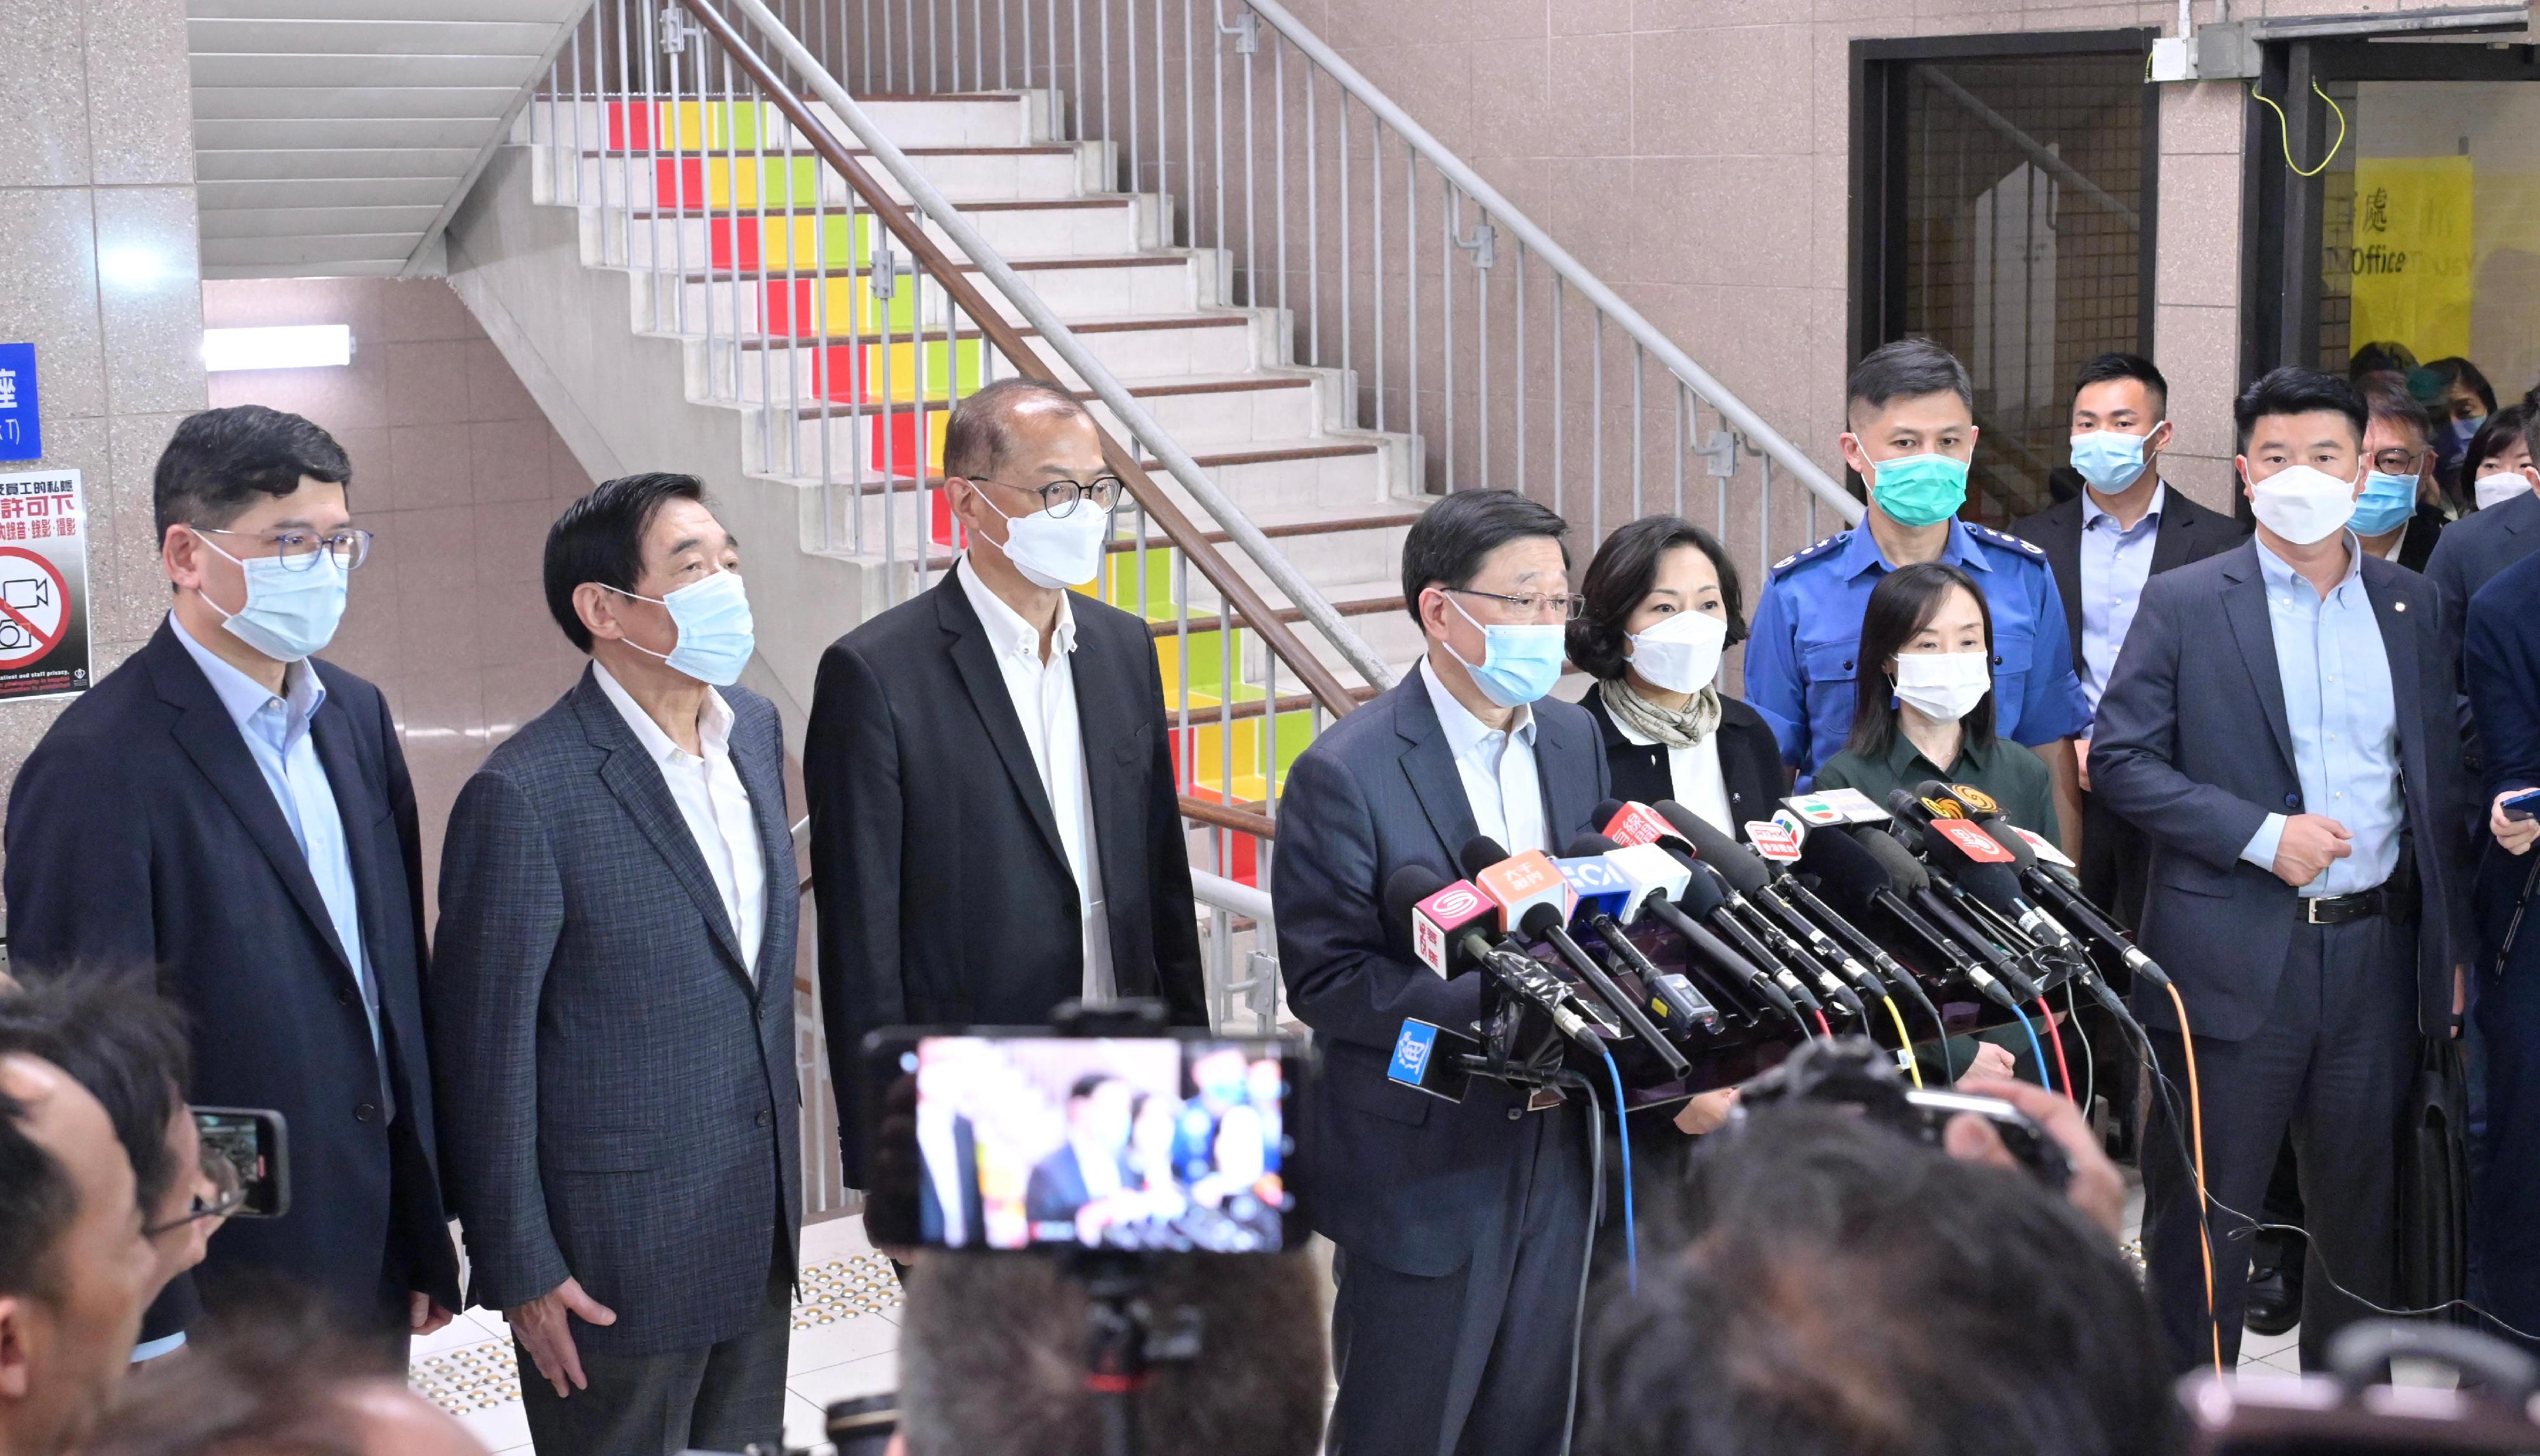 The Chief Executive, Mr John Lee, went to Queen Elizabeth Hospital today (April 10) to visit the injured persons of the No. 3 alarm fire at New Lucky House in Jordan. Photo shows Mr Lee (fourth left) together with the Secretary for Health, Professor Lo Chung-mau (third left); the Secretary for Home and Youth Affairs, Miss Alice Mak (fifth left); and representatives from the relevant departments and the Hospital Authority, meeting the media after the visit.